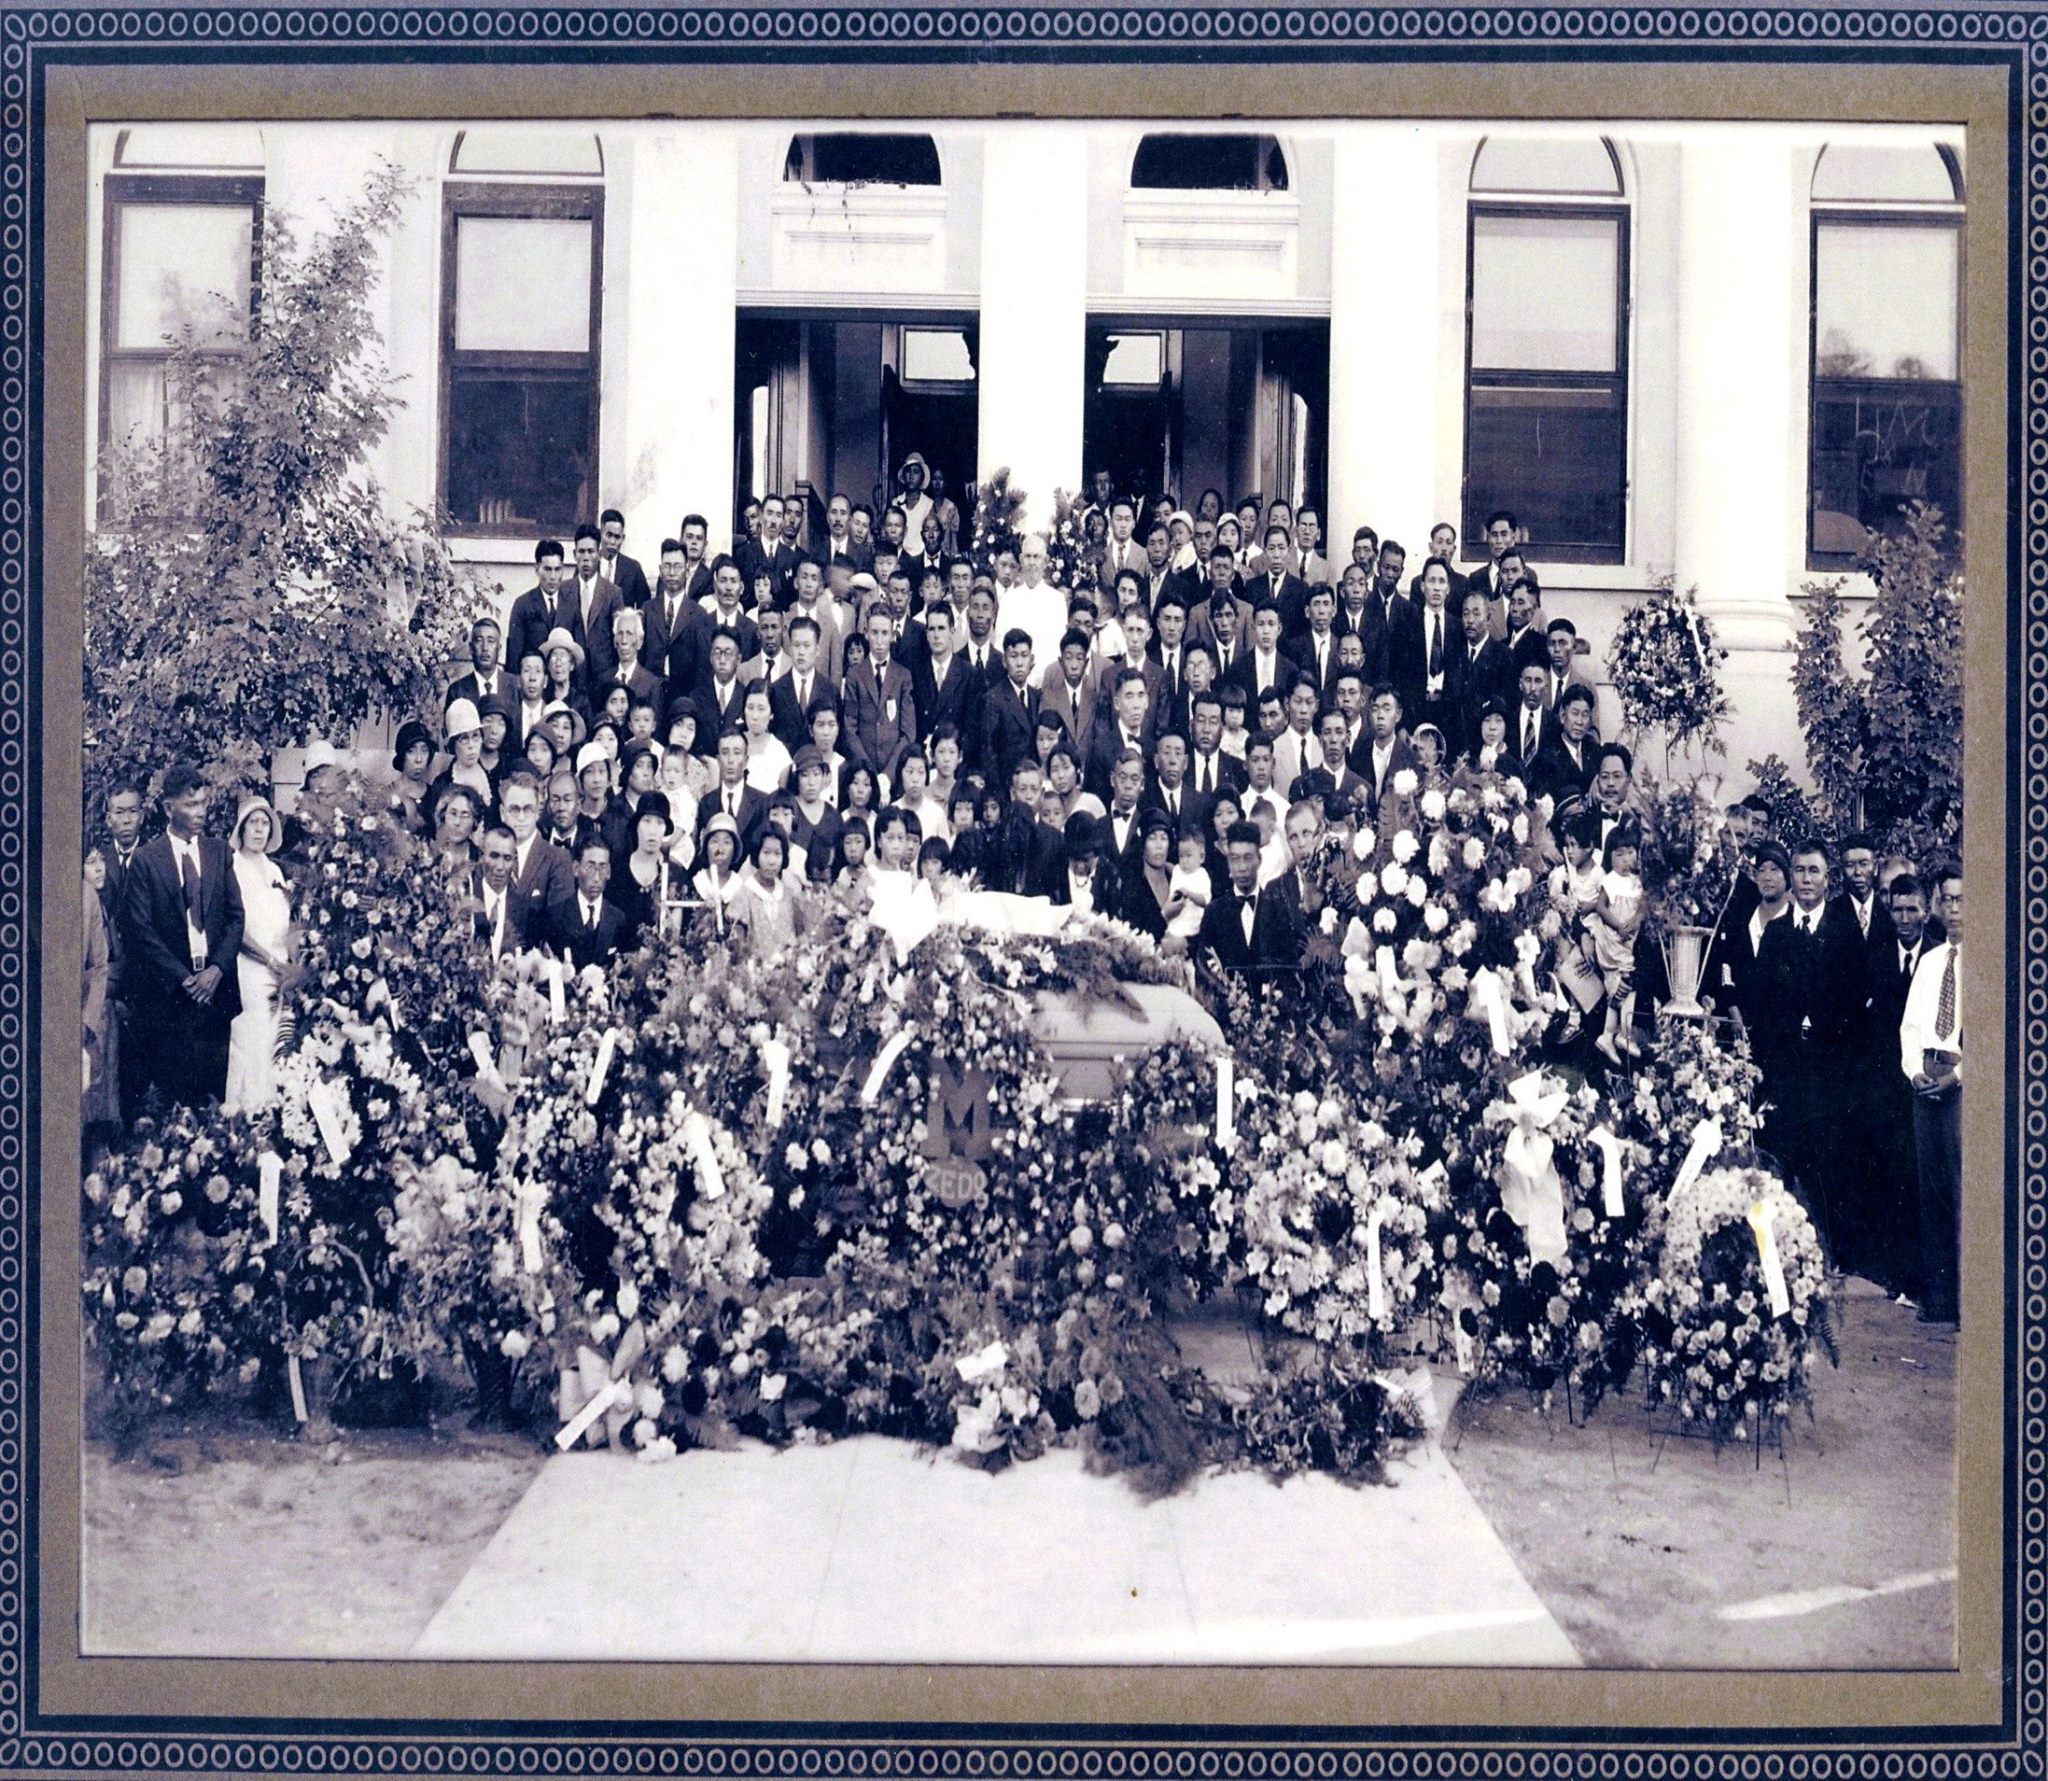 Zedo Ishikowa's funeral at Mesa High Oct. 3,1932
Double Click on photo to see it. Thank you Harold Bushman for the photo.